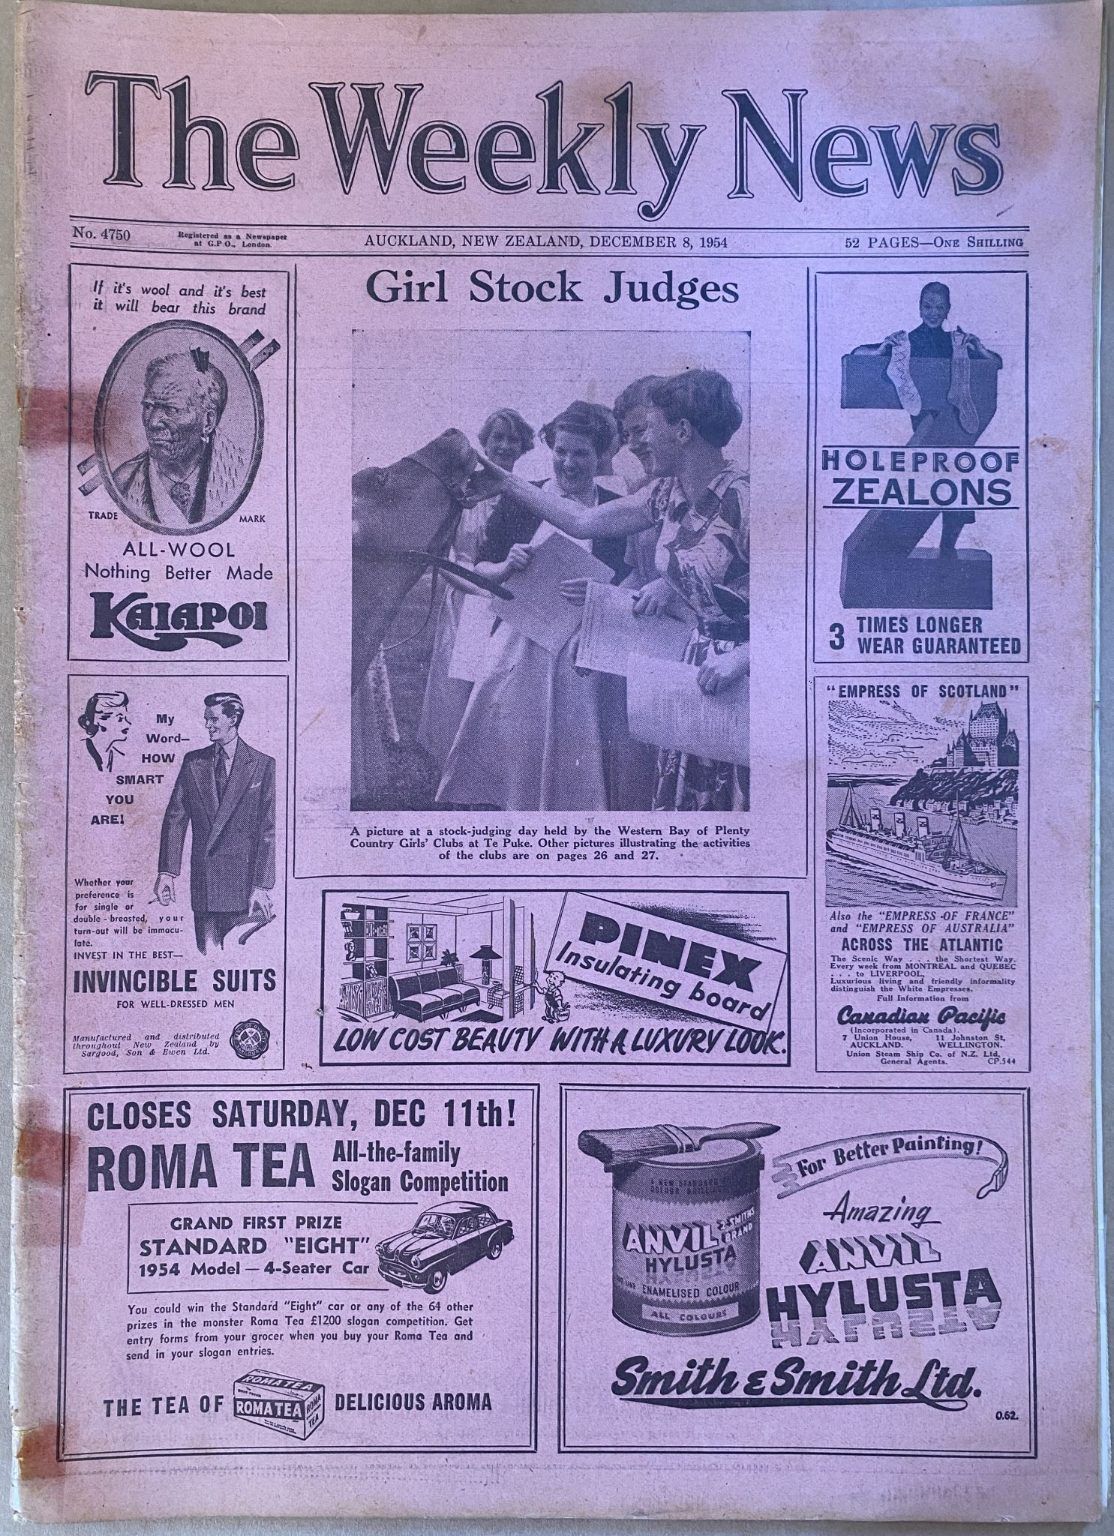 OLD NEWSPAPER: The Weekly News - No. 4750, 8 December 1954